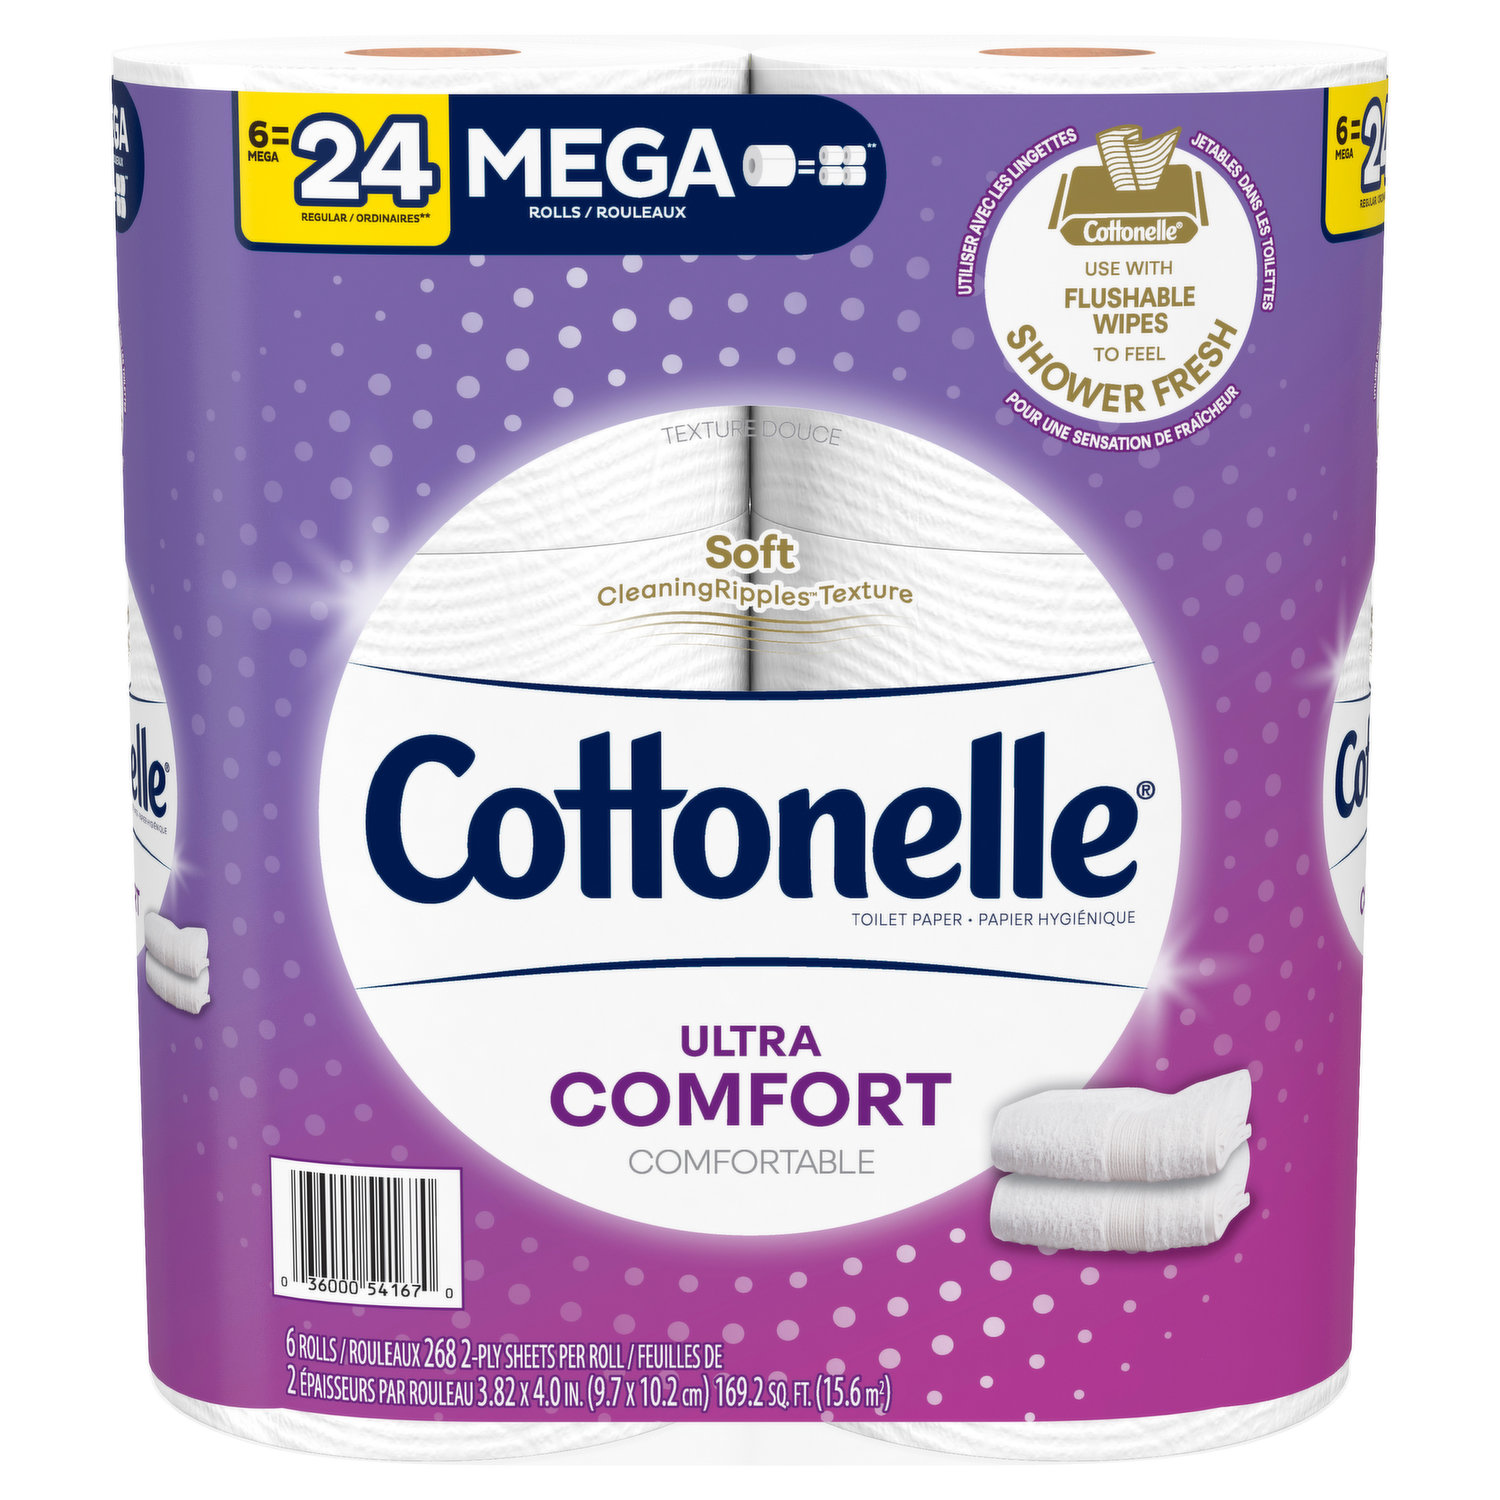 Quilted Northern Ultra Soft & Strong Sustainable Comfort 2-Ply Toilet  Paper, 6-Mega Rolls